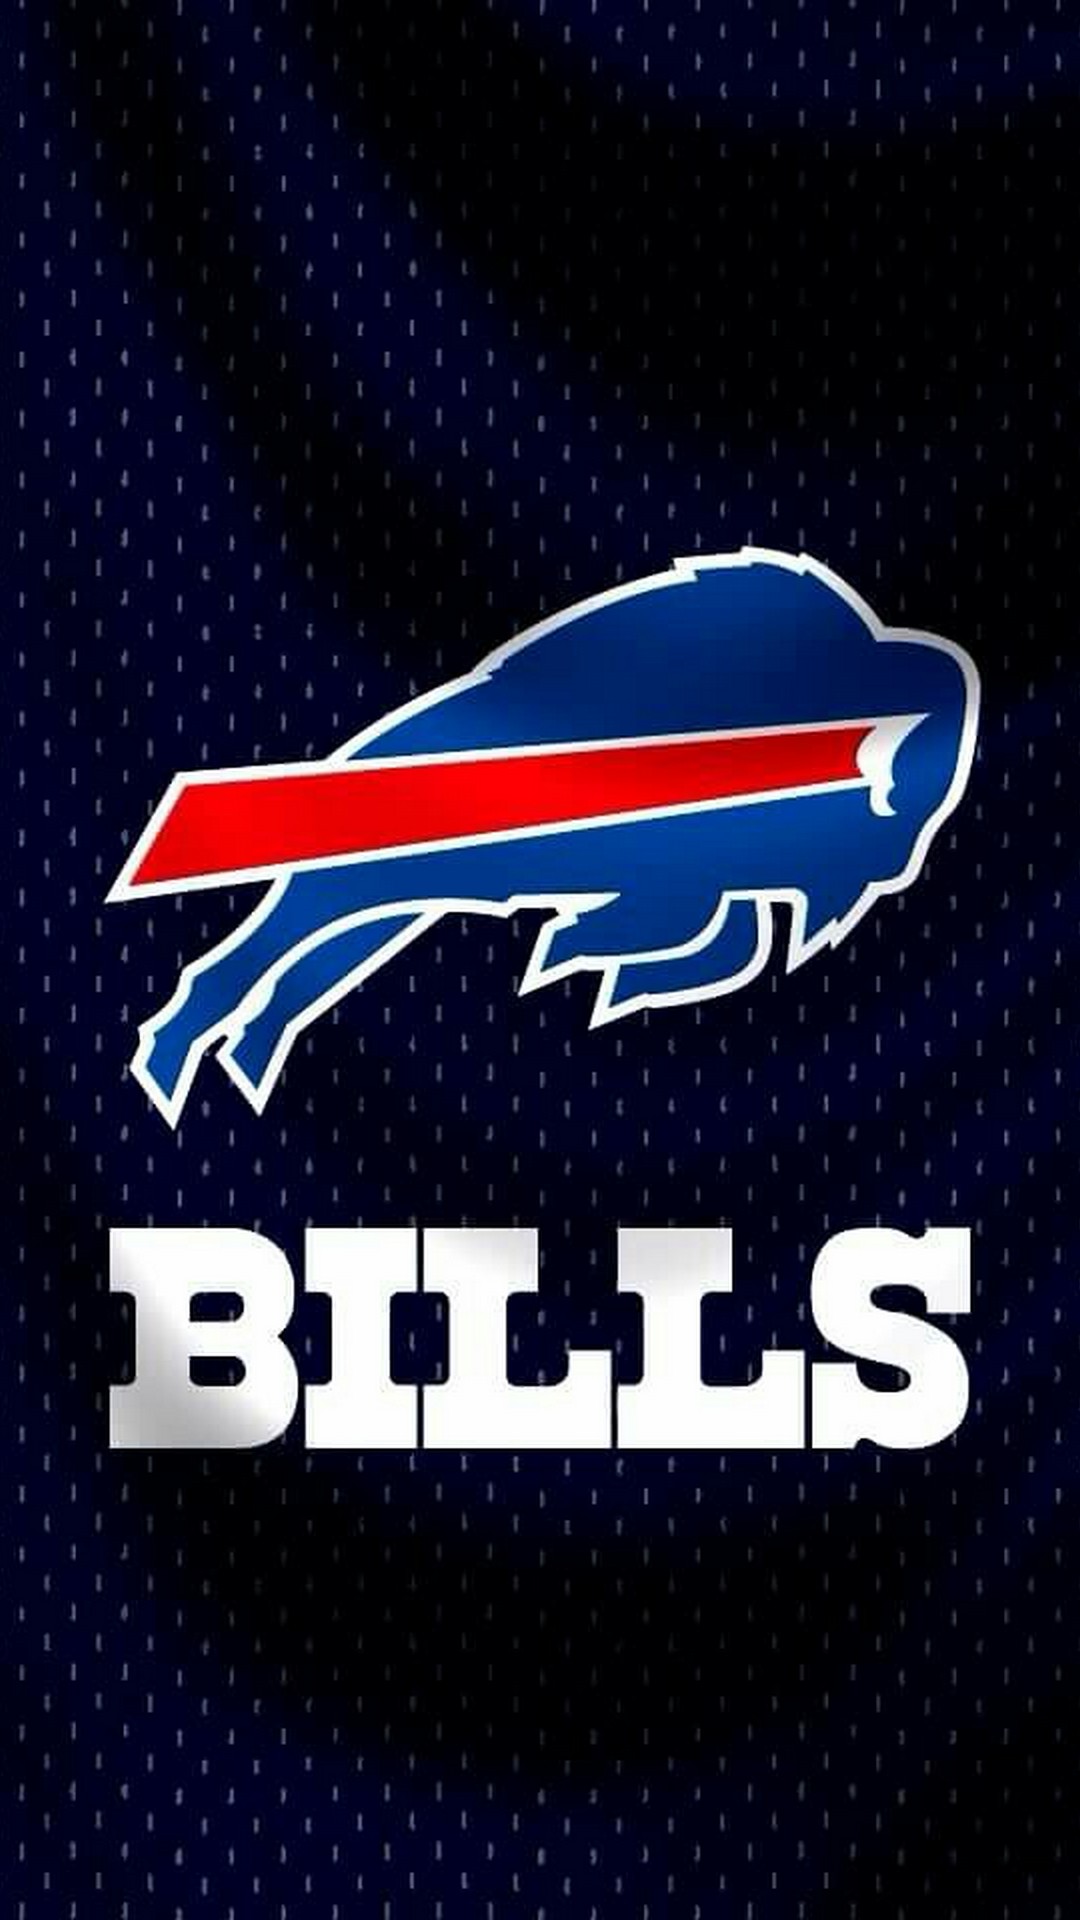 Buffalo Bills iPhone 8 Wallpaper with high-resolution 1080x1920 pixel. Download and set as wallpaper for Apple iPhone X, XS Max, XR, 8, 7, 6, SE, iPad, Android